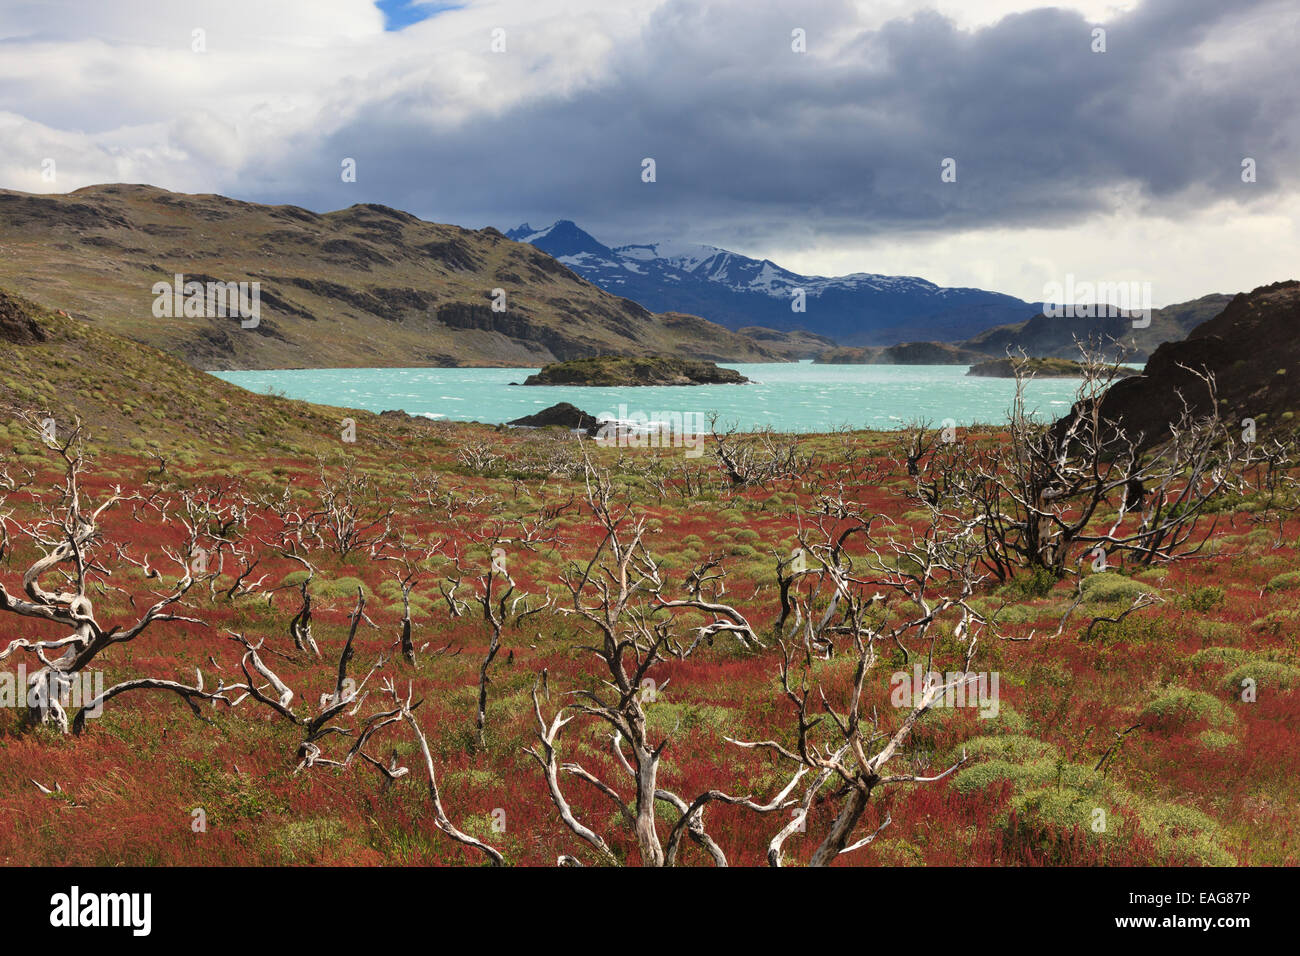 Lake, Torres Del Paine National Park, Chile Stock Photo